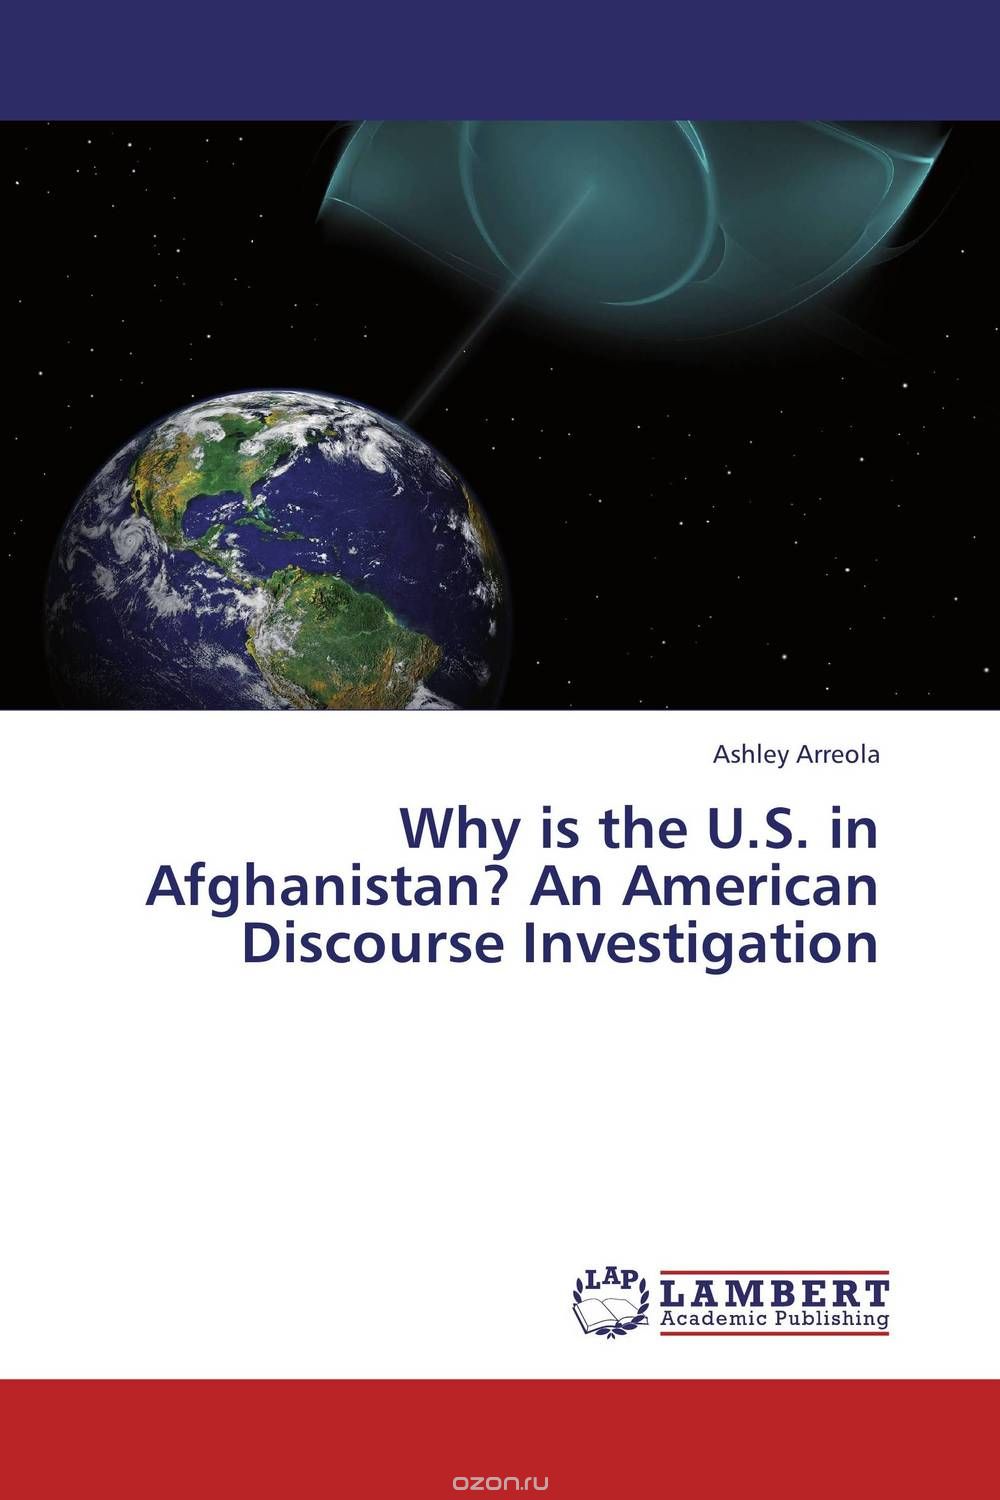 Скачать книгу "Why is the U.S. in Afghanistan? An American Discourse Investigation"